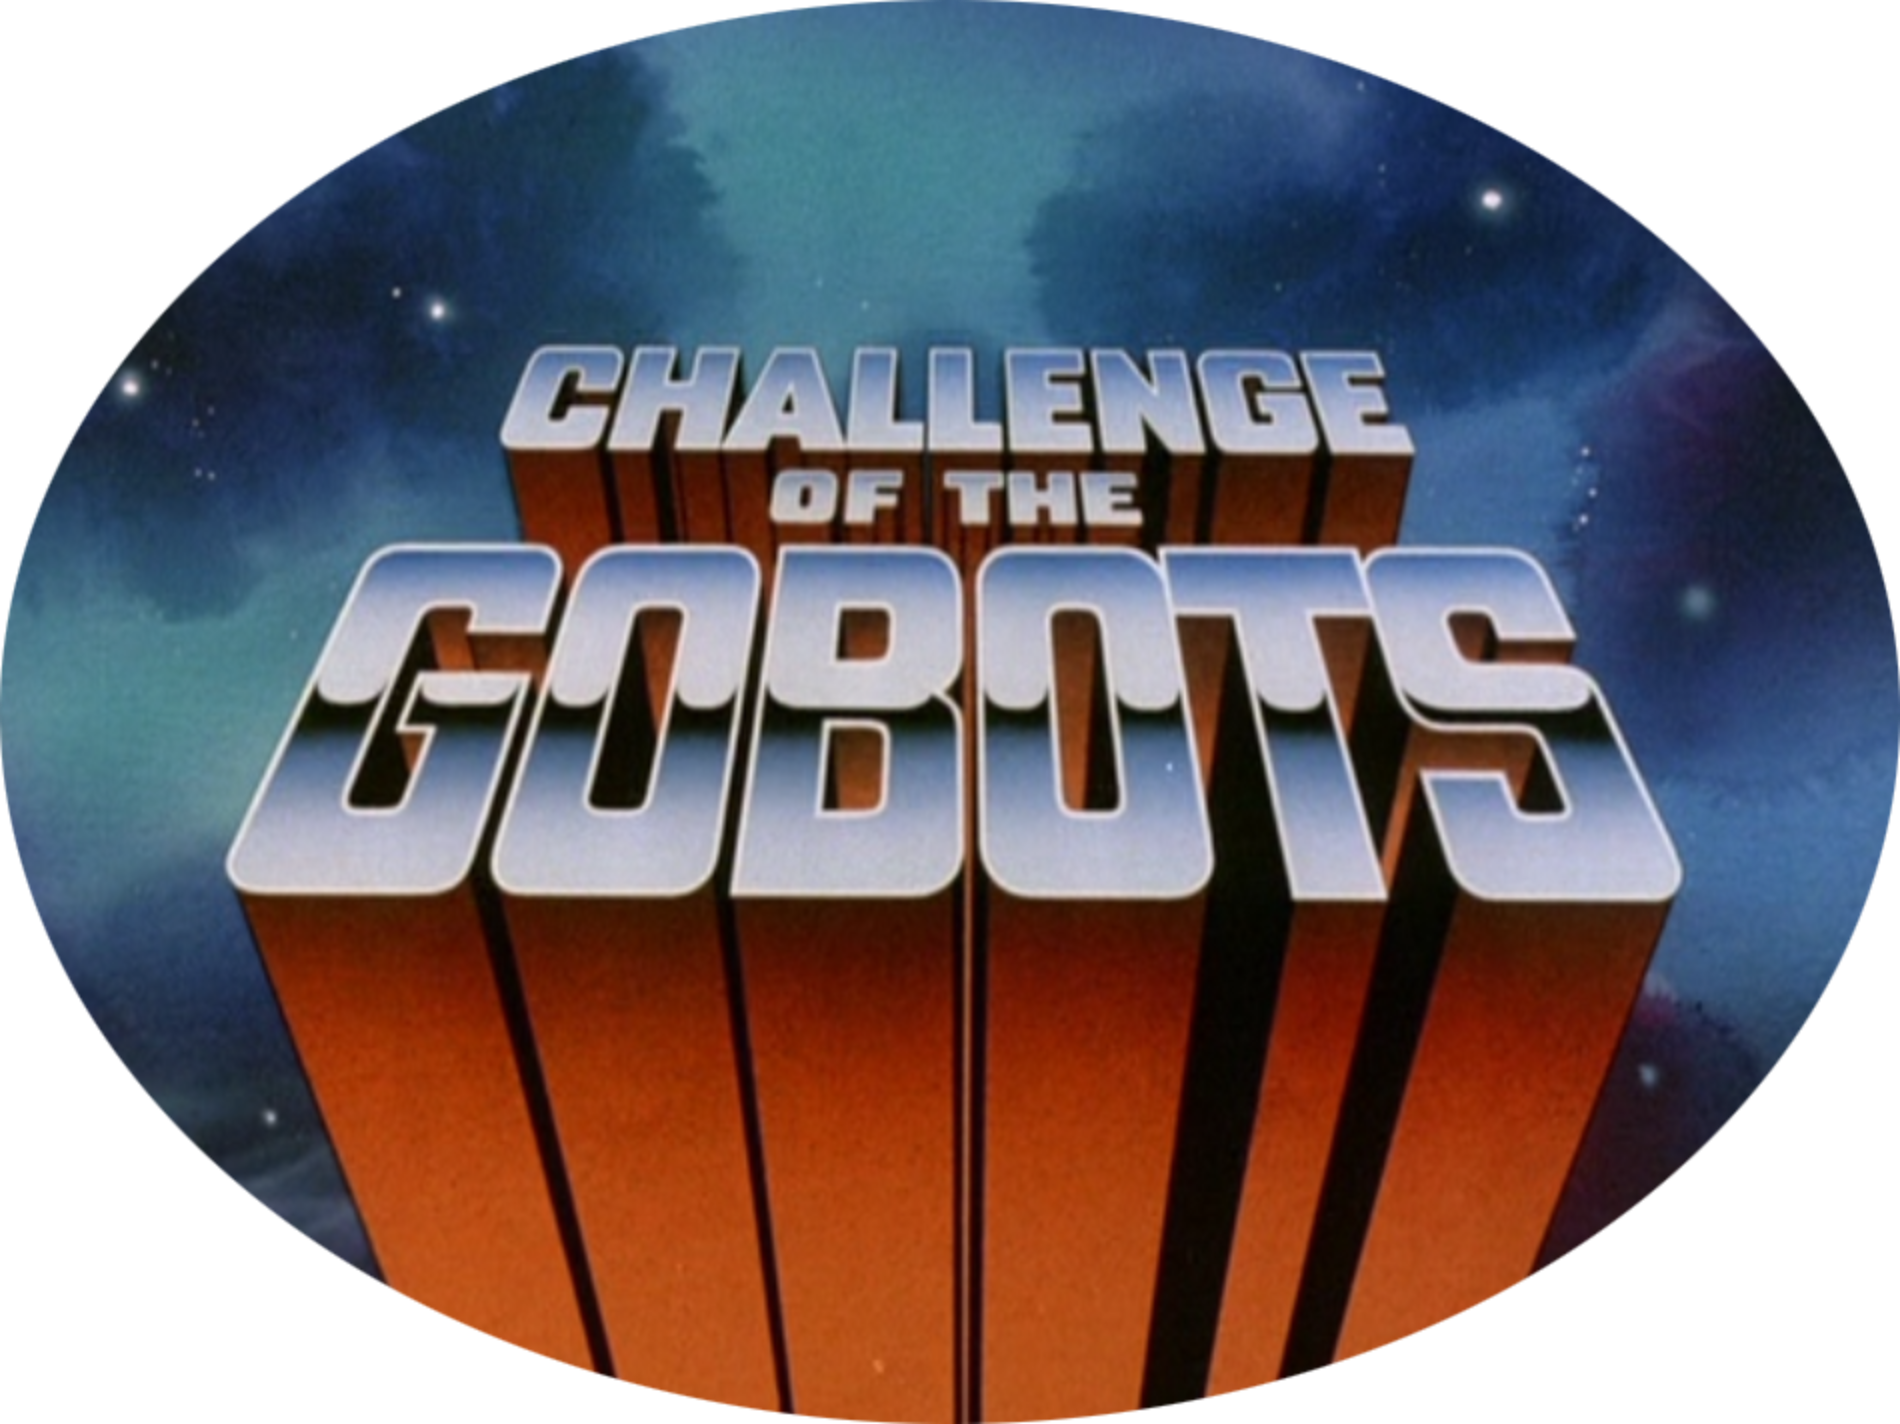 Challenge of the GoBots (6 DVDs Box Set)